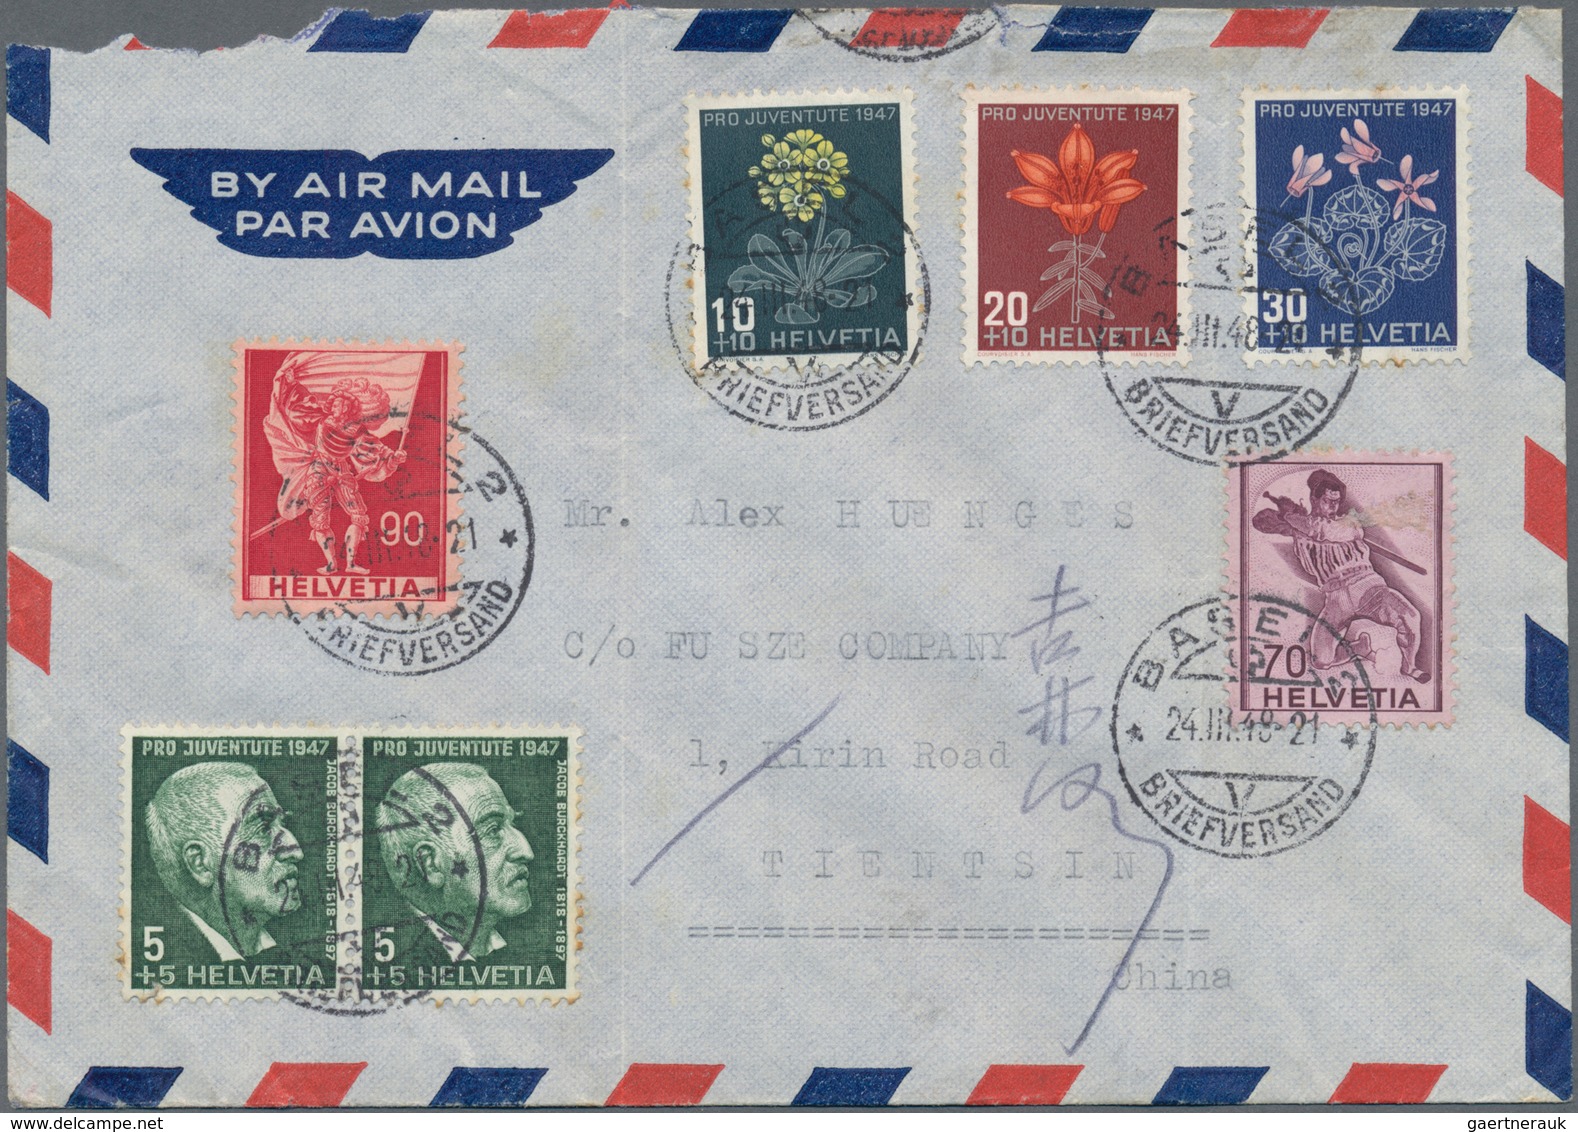 China: 1936/48, covers to Germany: from China (2), Manchoukuo (3), HK postwar (4), also Taiwan/PRC 1